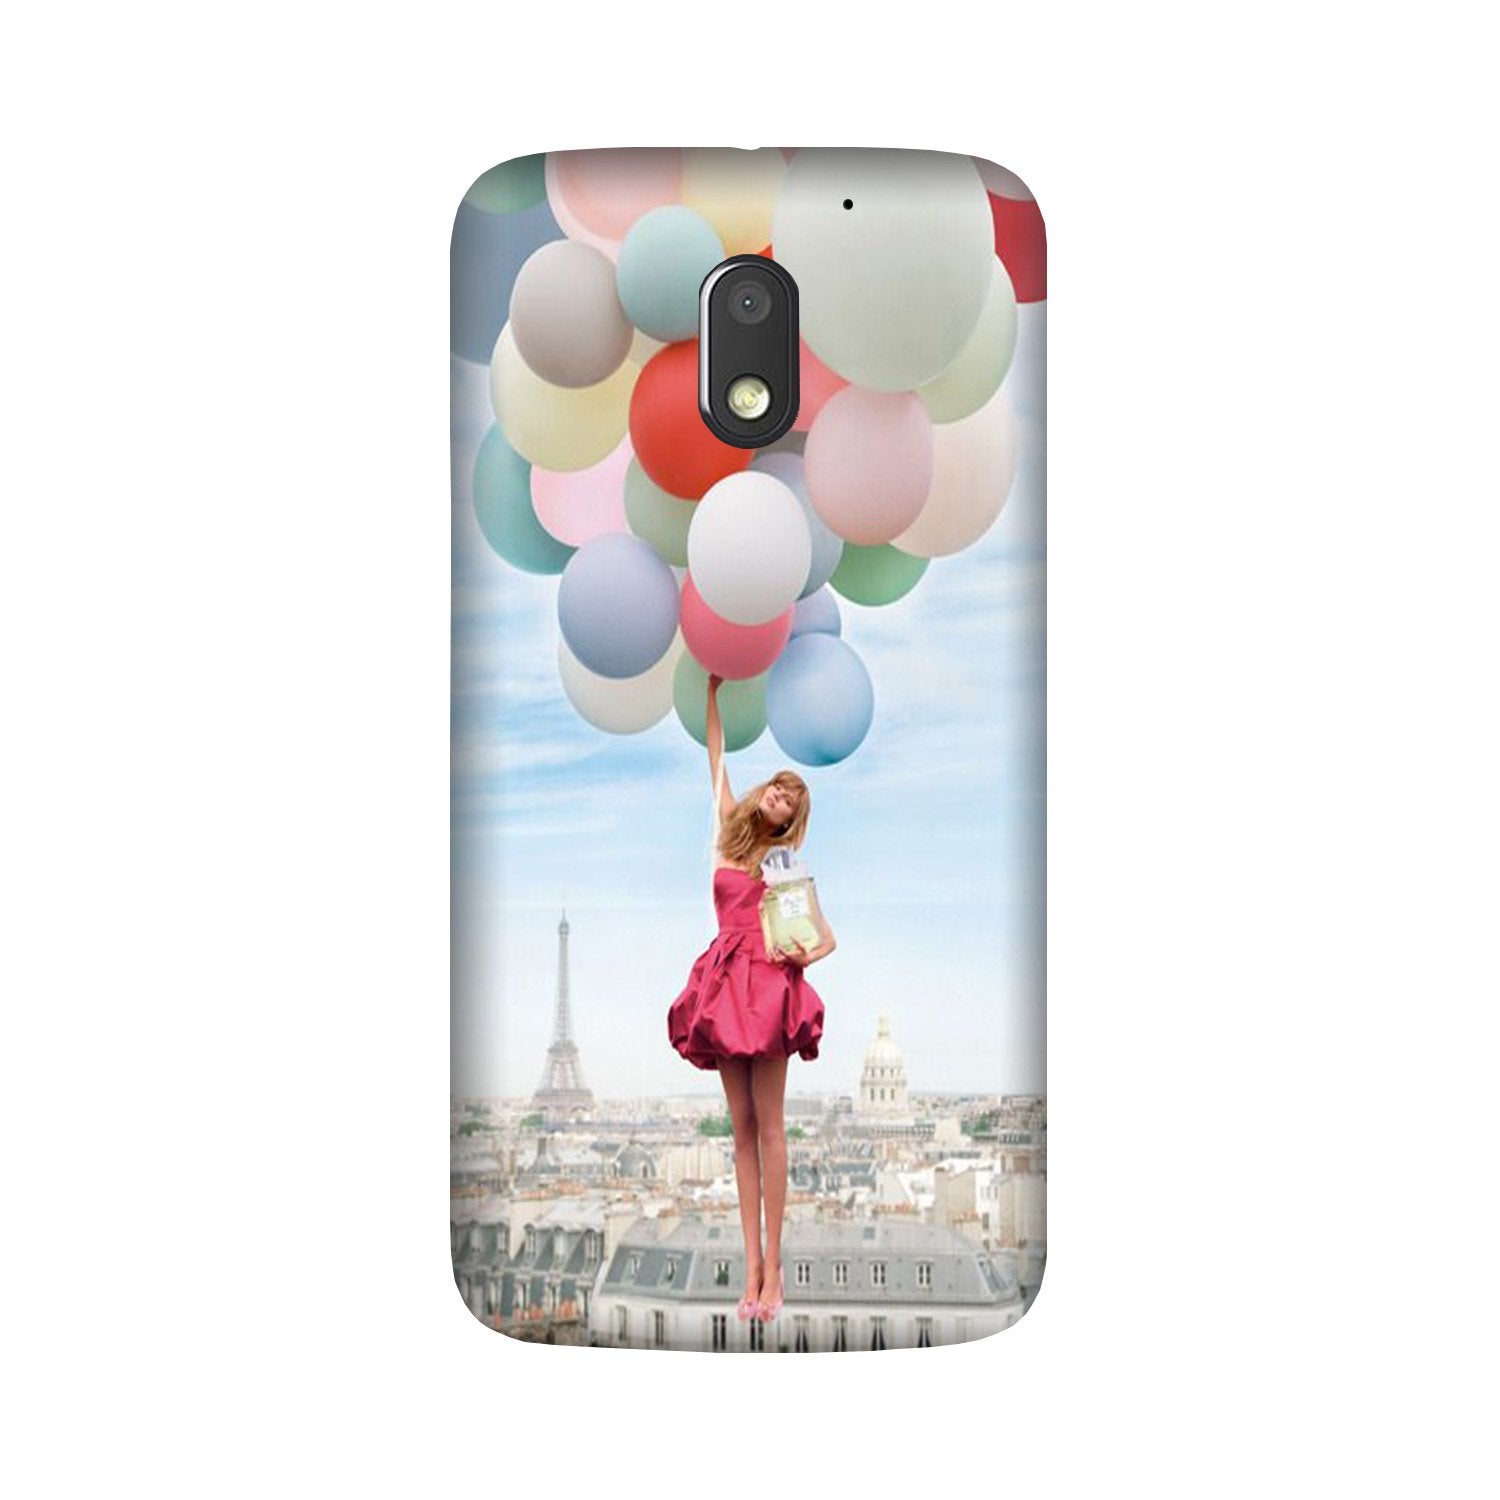 Girl with Baloon Case for Moto G4 Play